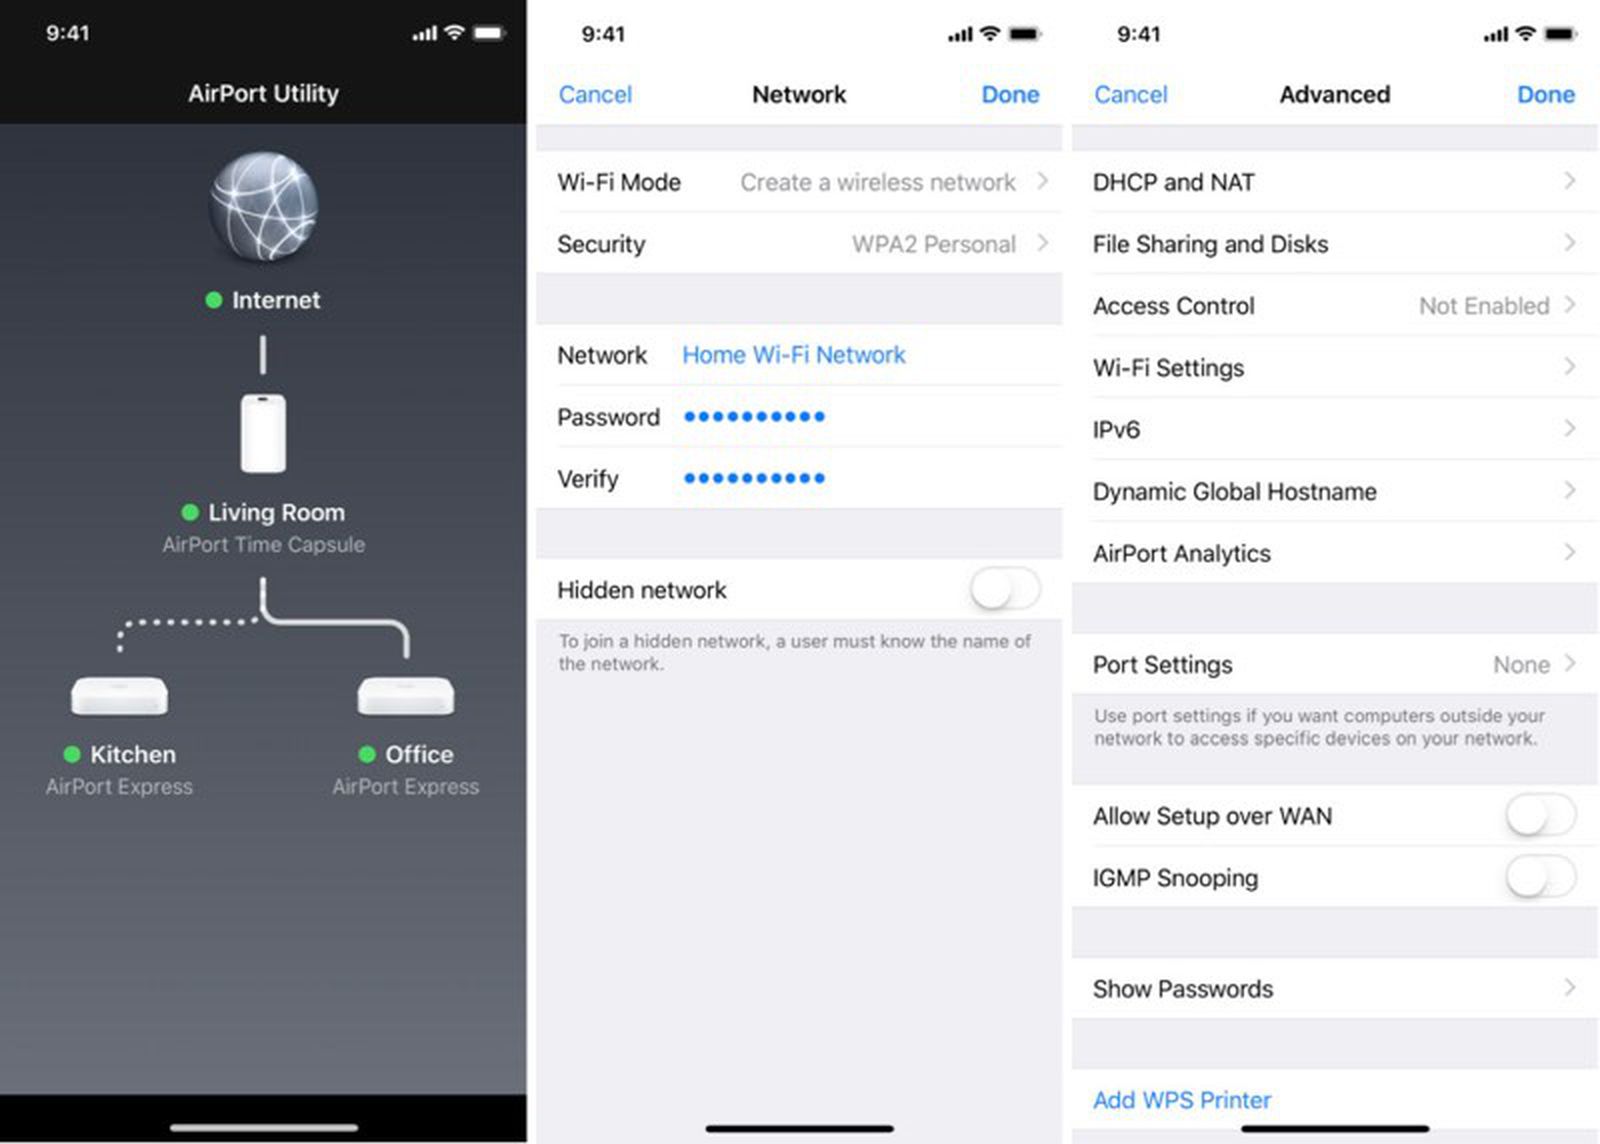 Apple's AirPort Utility App Finally Gains Support for iPhone X Display -  MacRumors